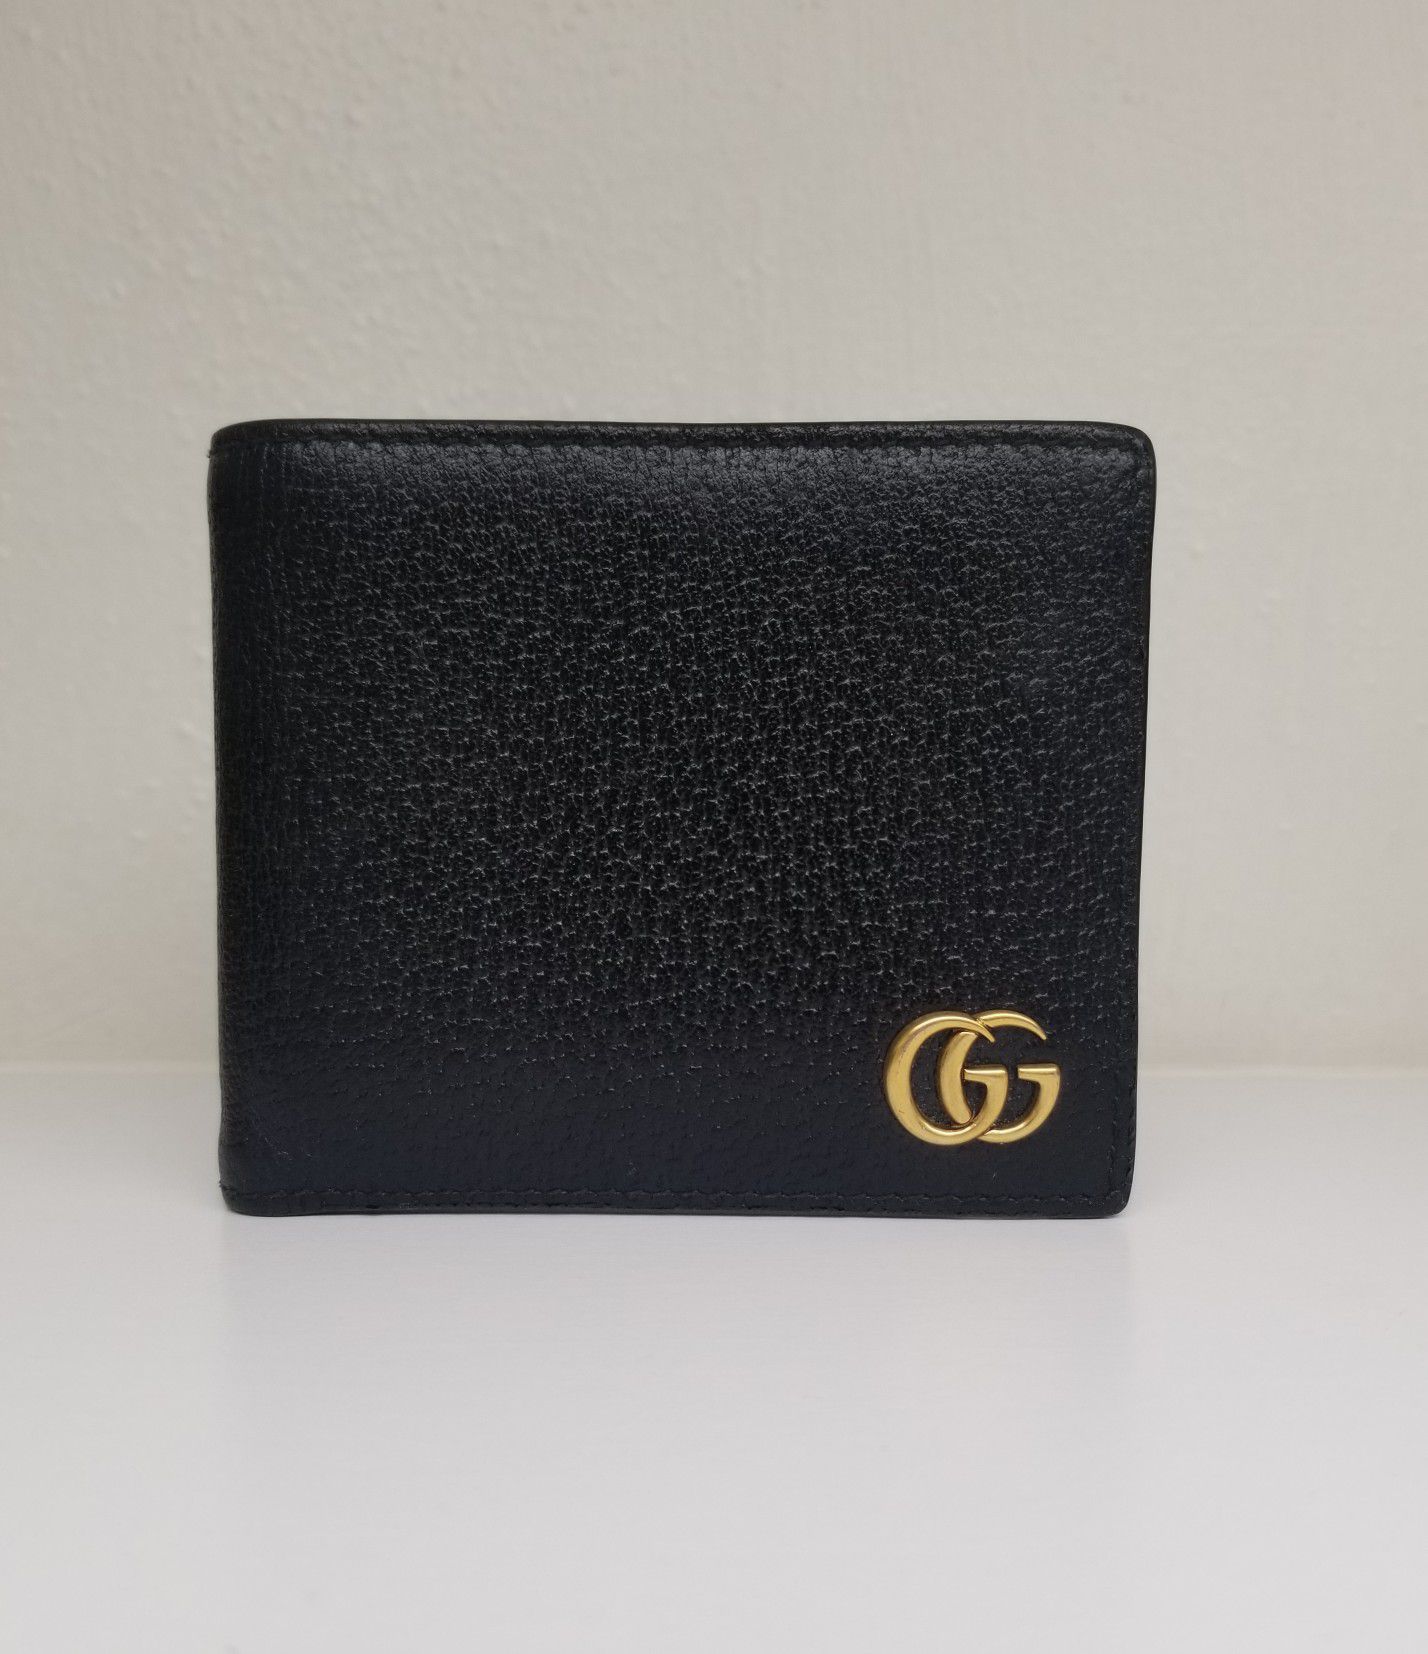 💯 Authentic Gucci Marmont Leather Bi-fold Wallet💨